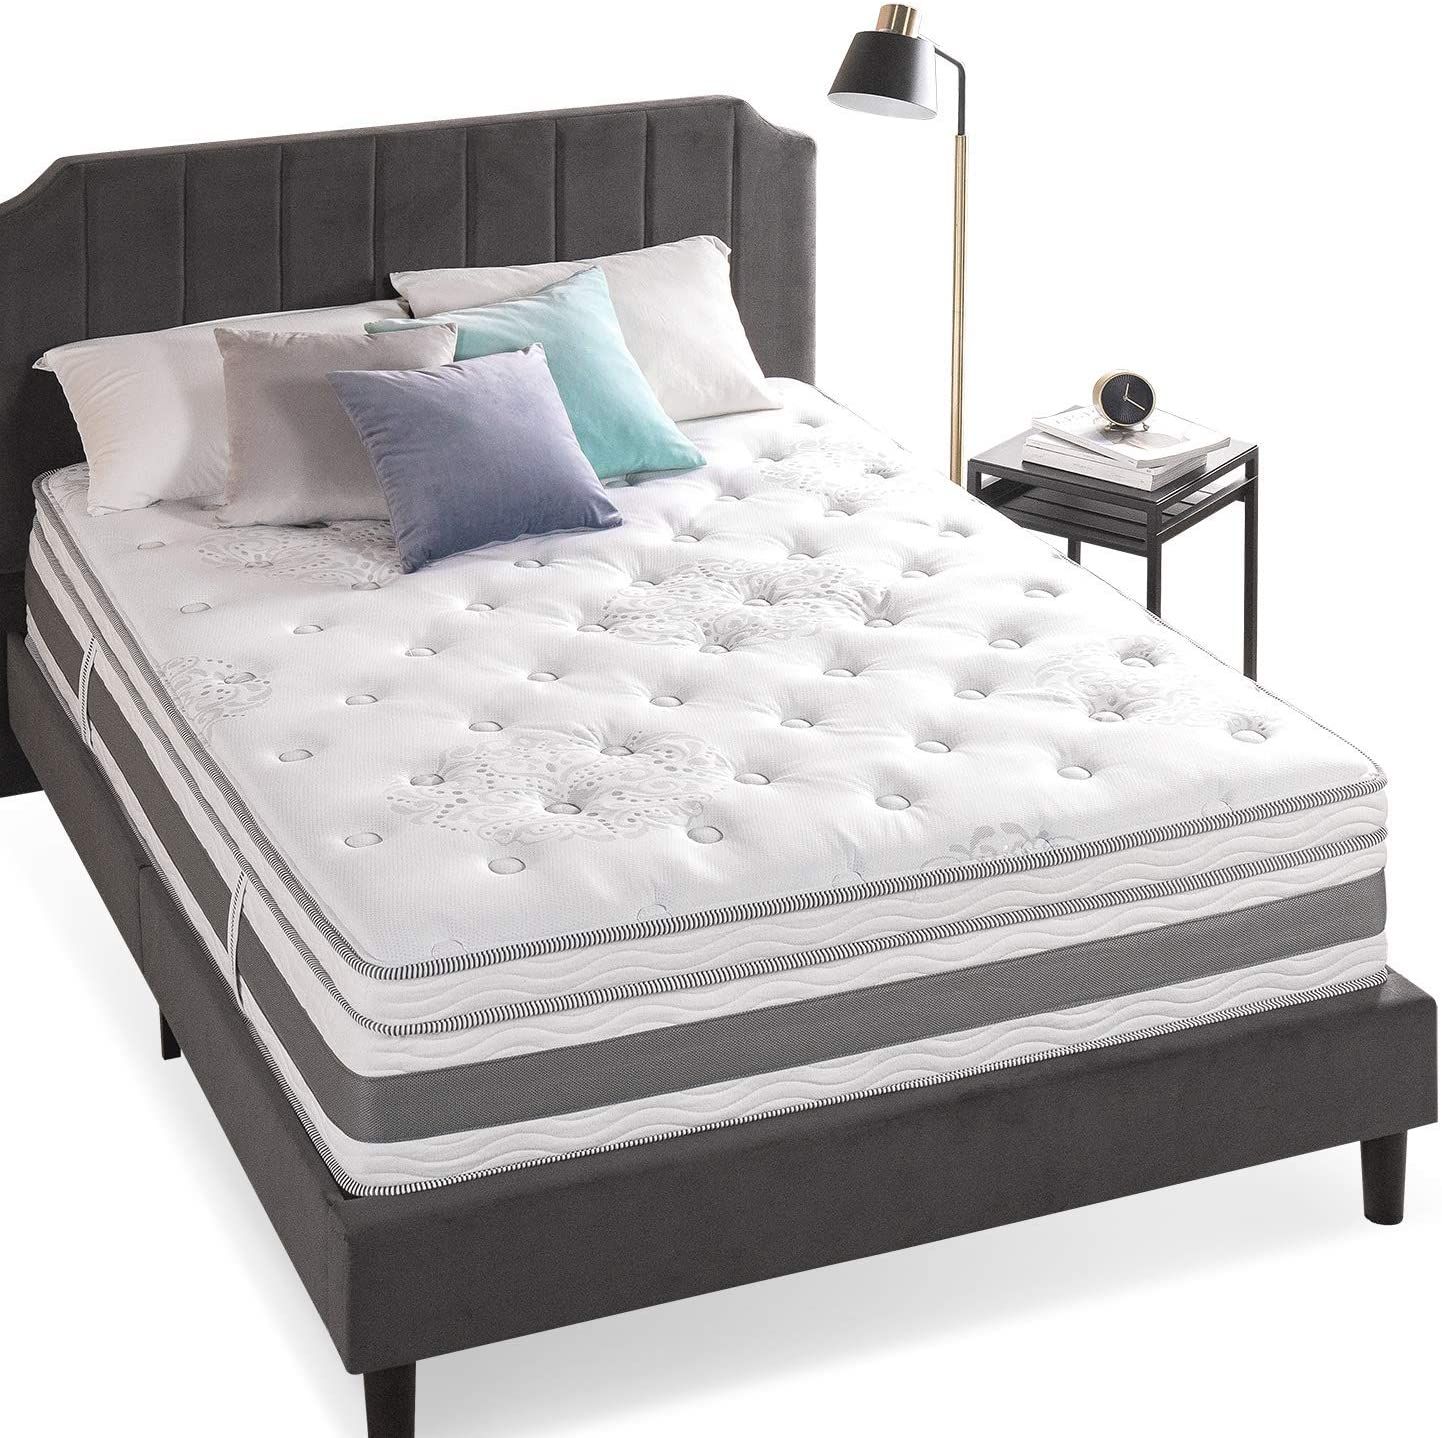 The 10 Best Hybrid Mattresses of 2021 — ReviewThis